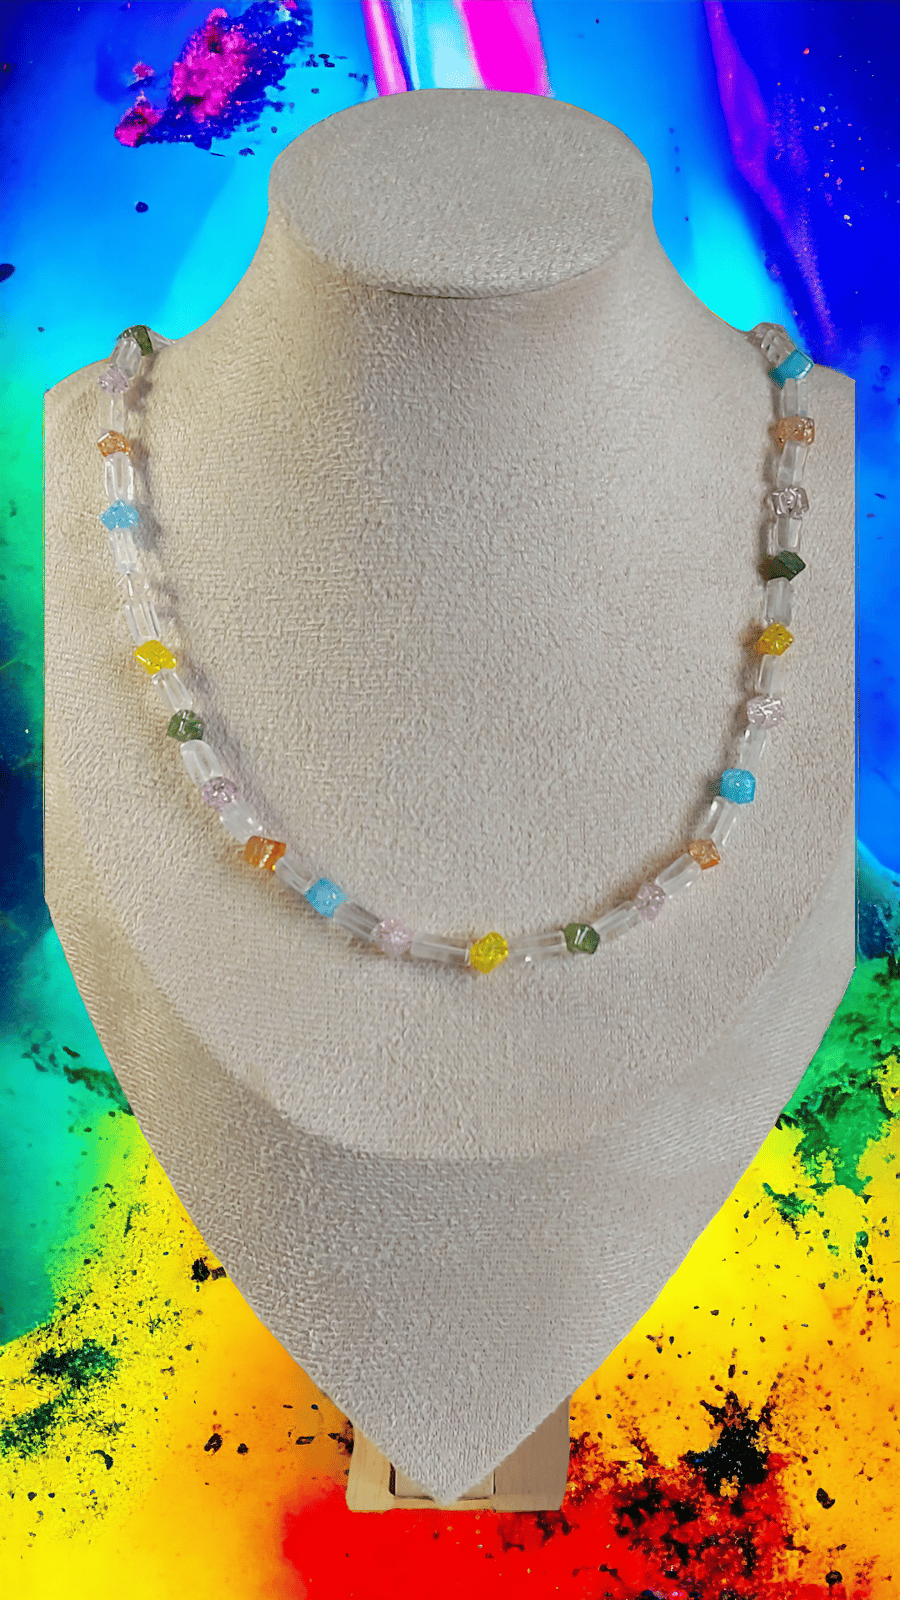 Rainbow Crackled And Clear Quartz Necklace with Sterling Silver 